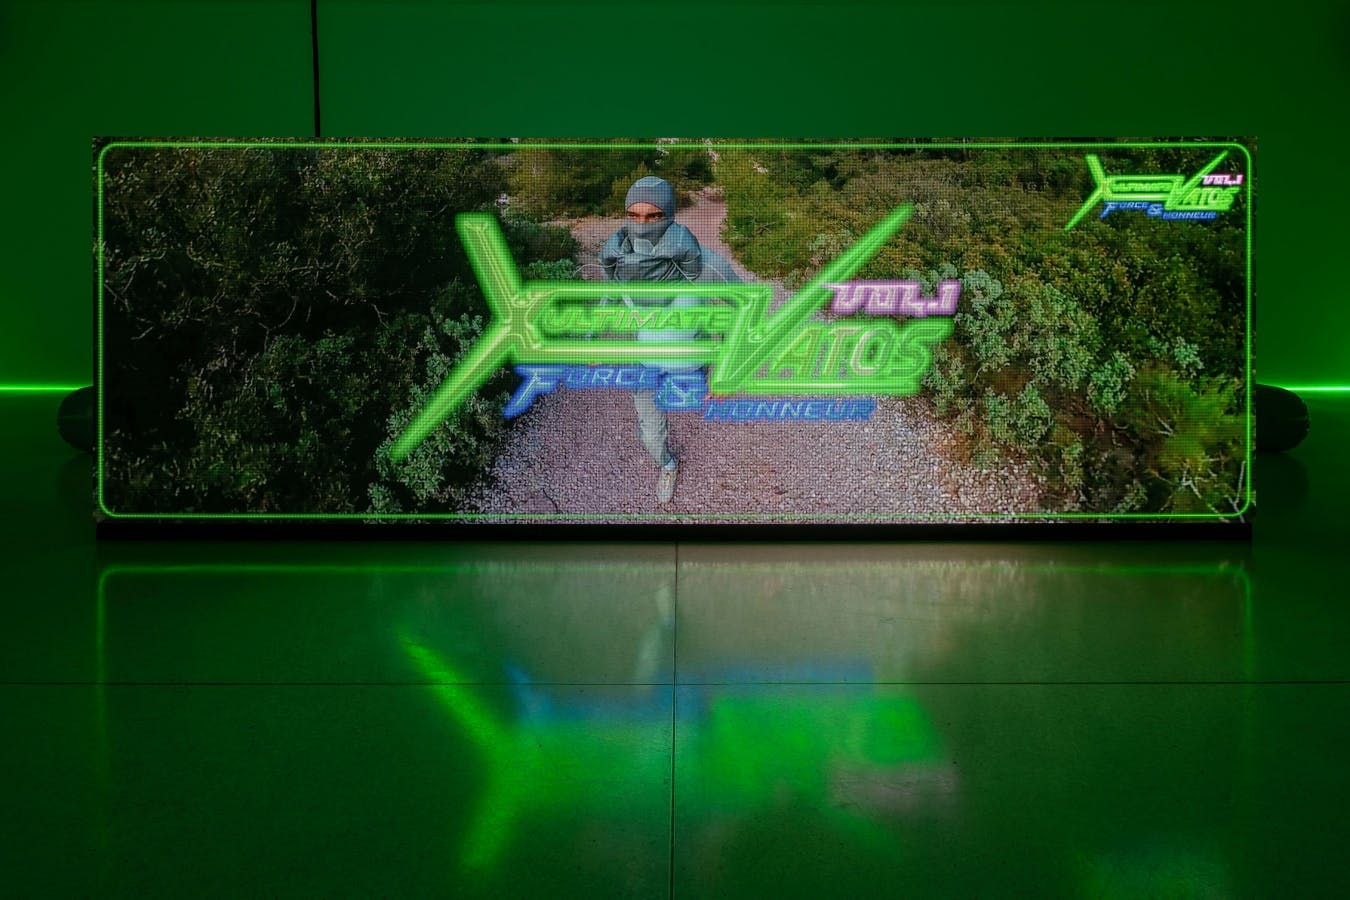 image of a green futuristic artwork with an individual running through a forest